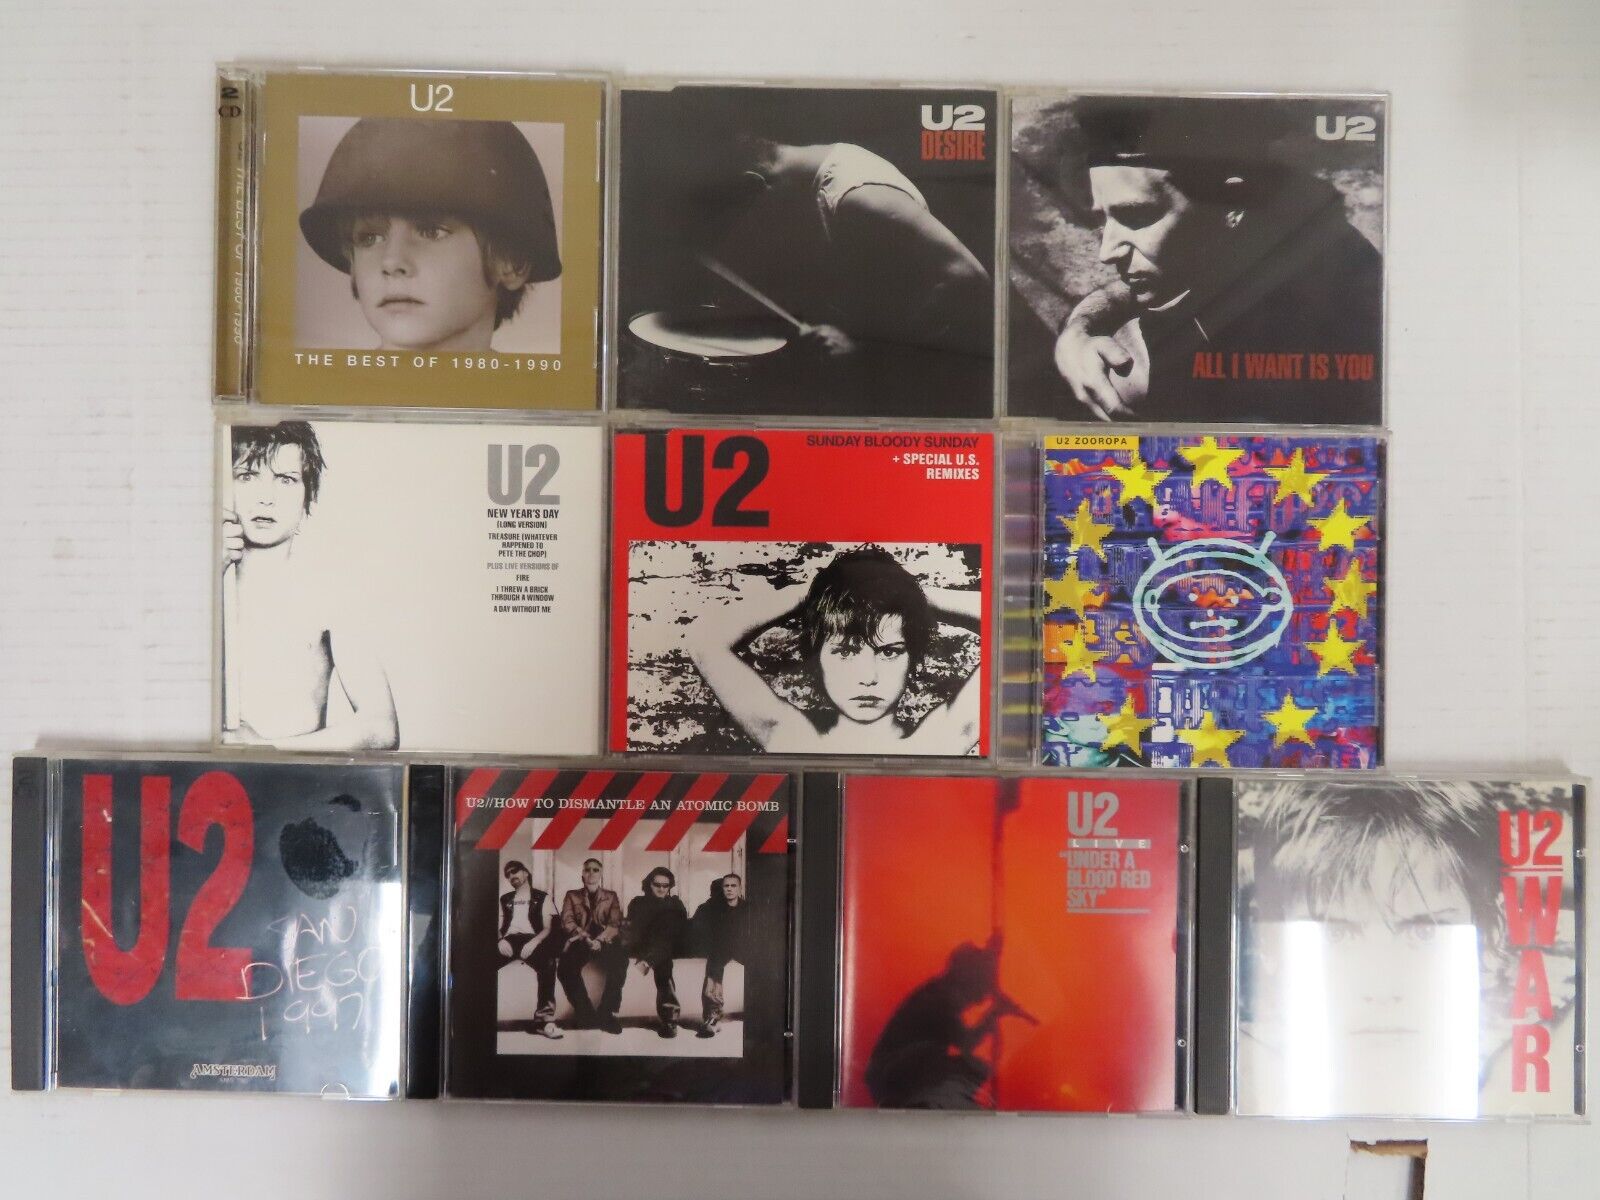 LOT OF 10 U2 MUSIC CDS - THE B-SIDES, DESIRE, ALL I WANT IS YOU, NEW YEARS DAY++